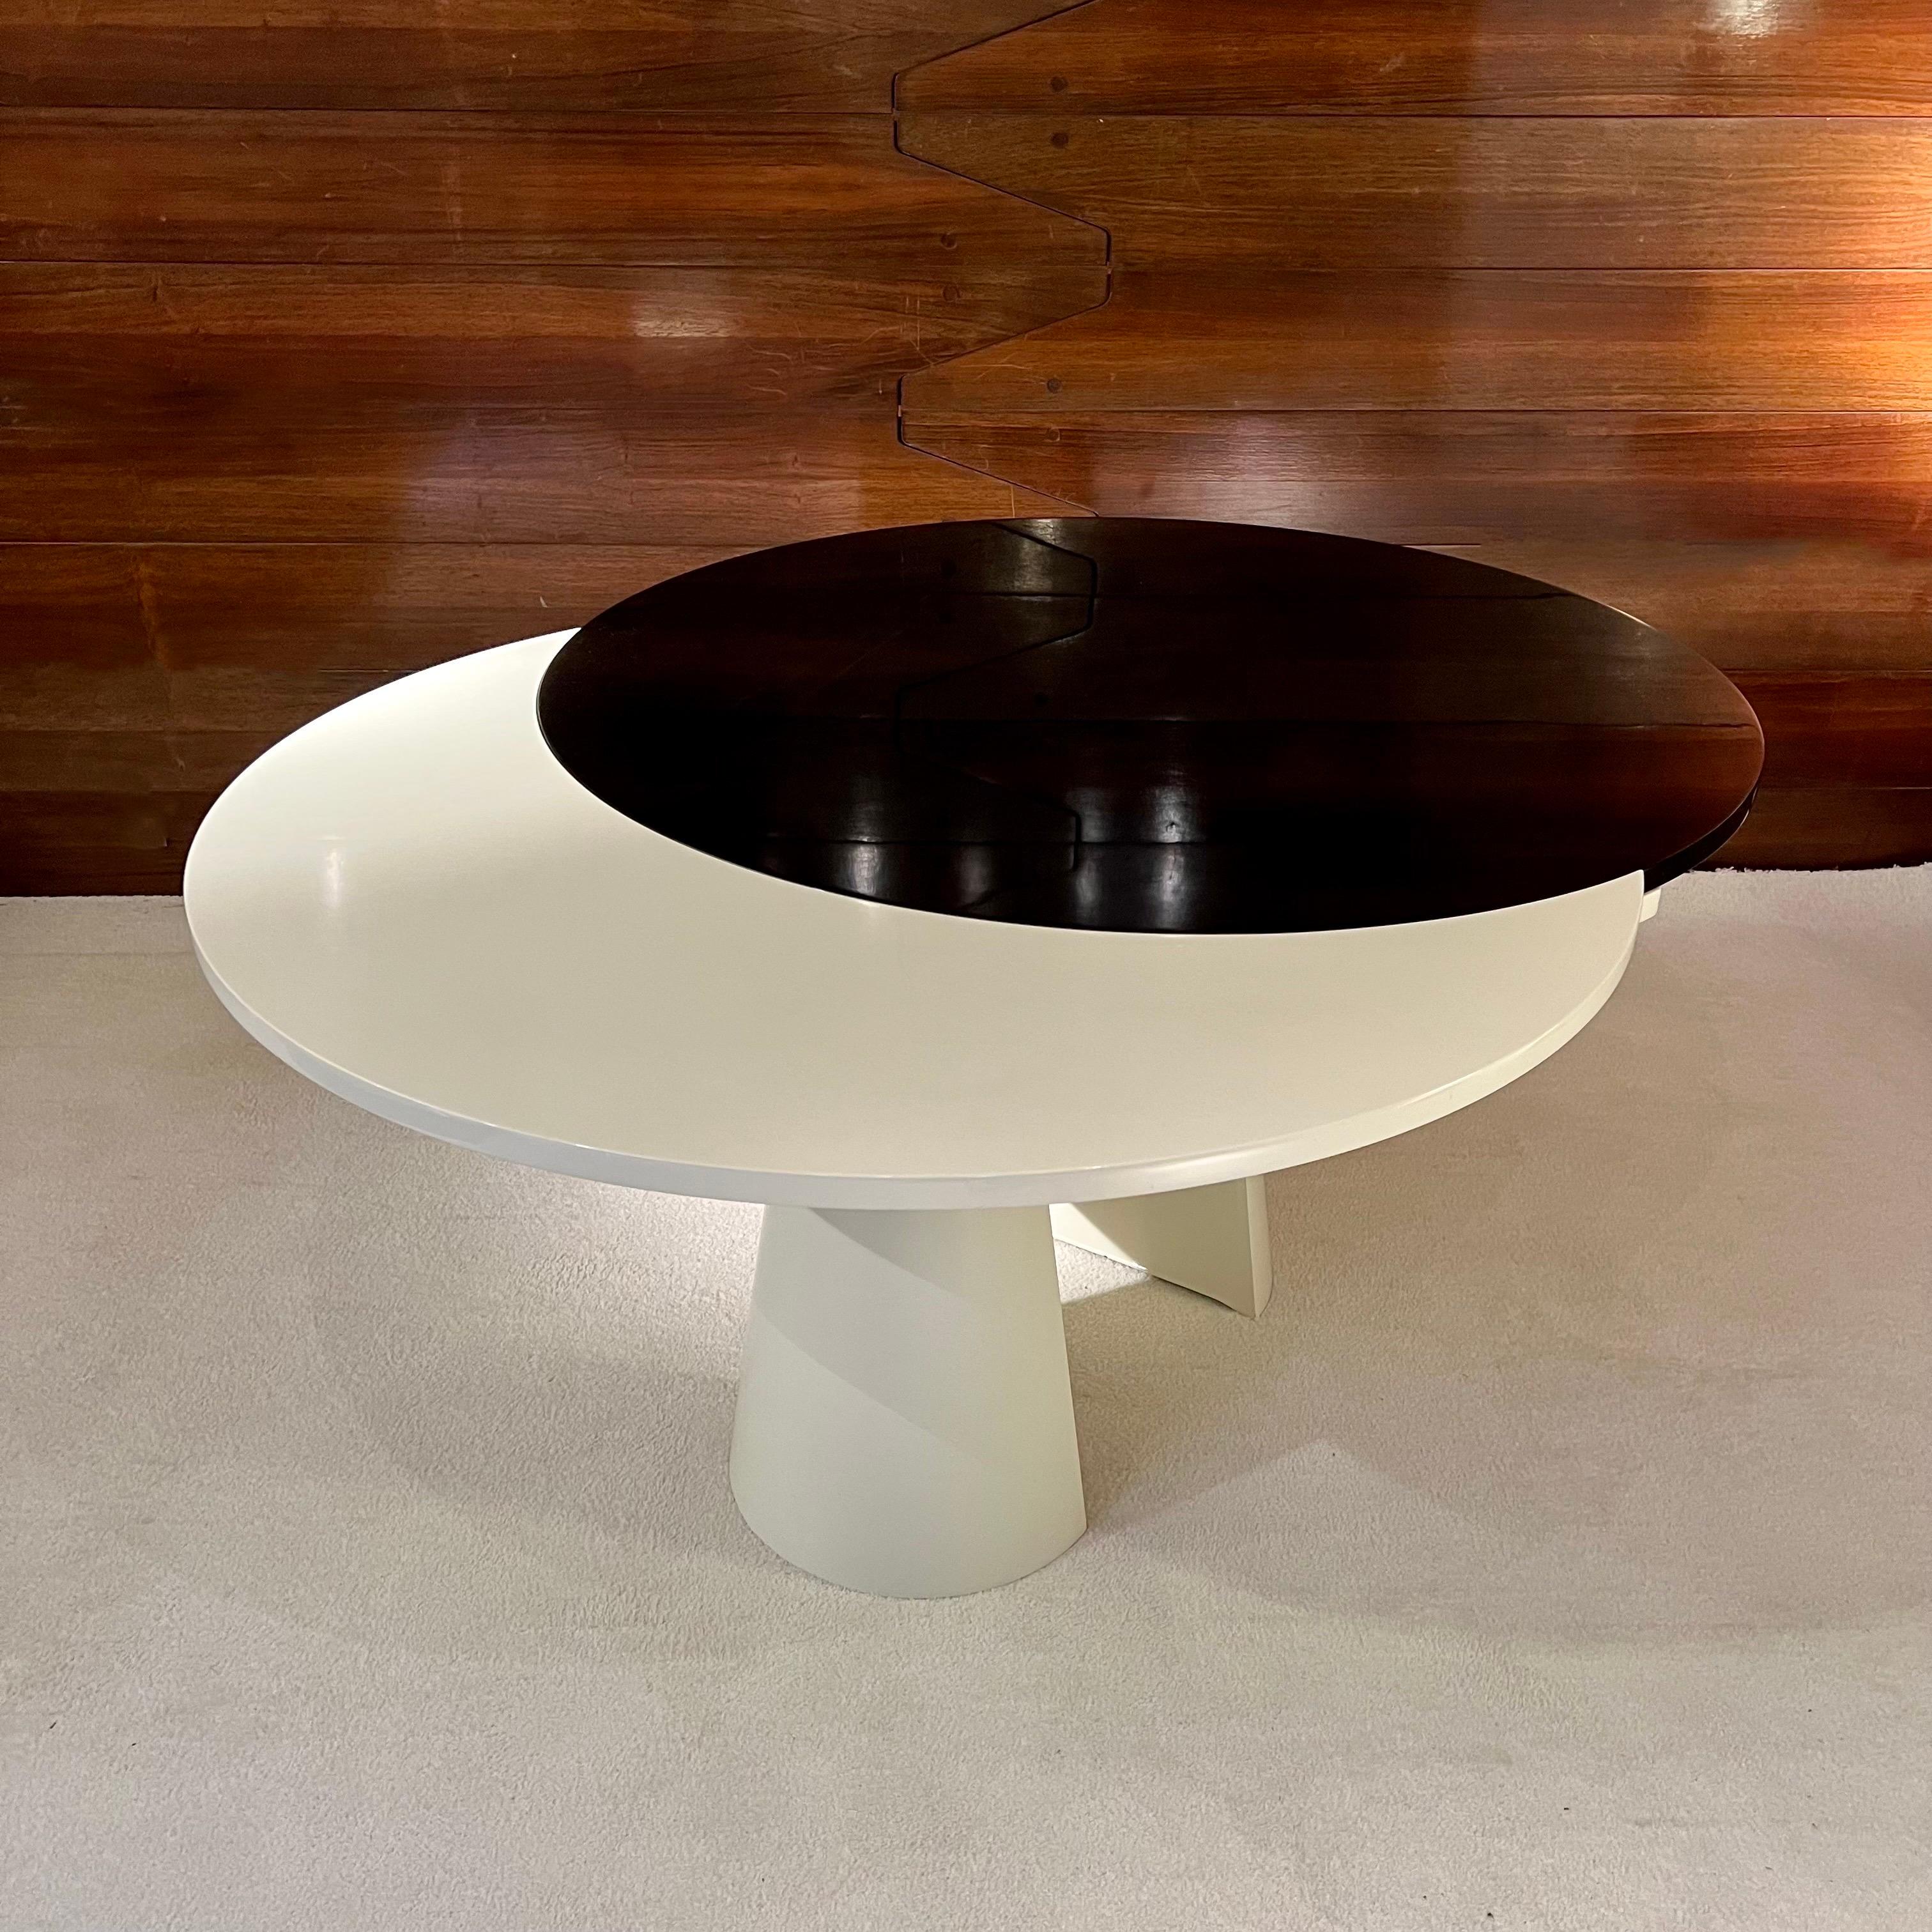 This superb table, made in France in the '80s, features two lacquered tops, black and white. The ingenious extension system allows it to be converted from a round to an oval table. The base is in white lacquered metal.
This uniquely styled table is